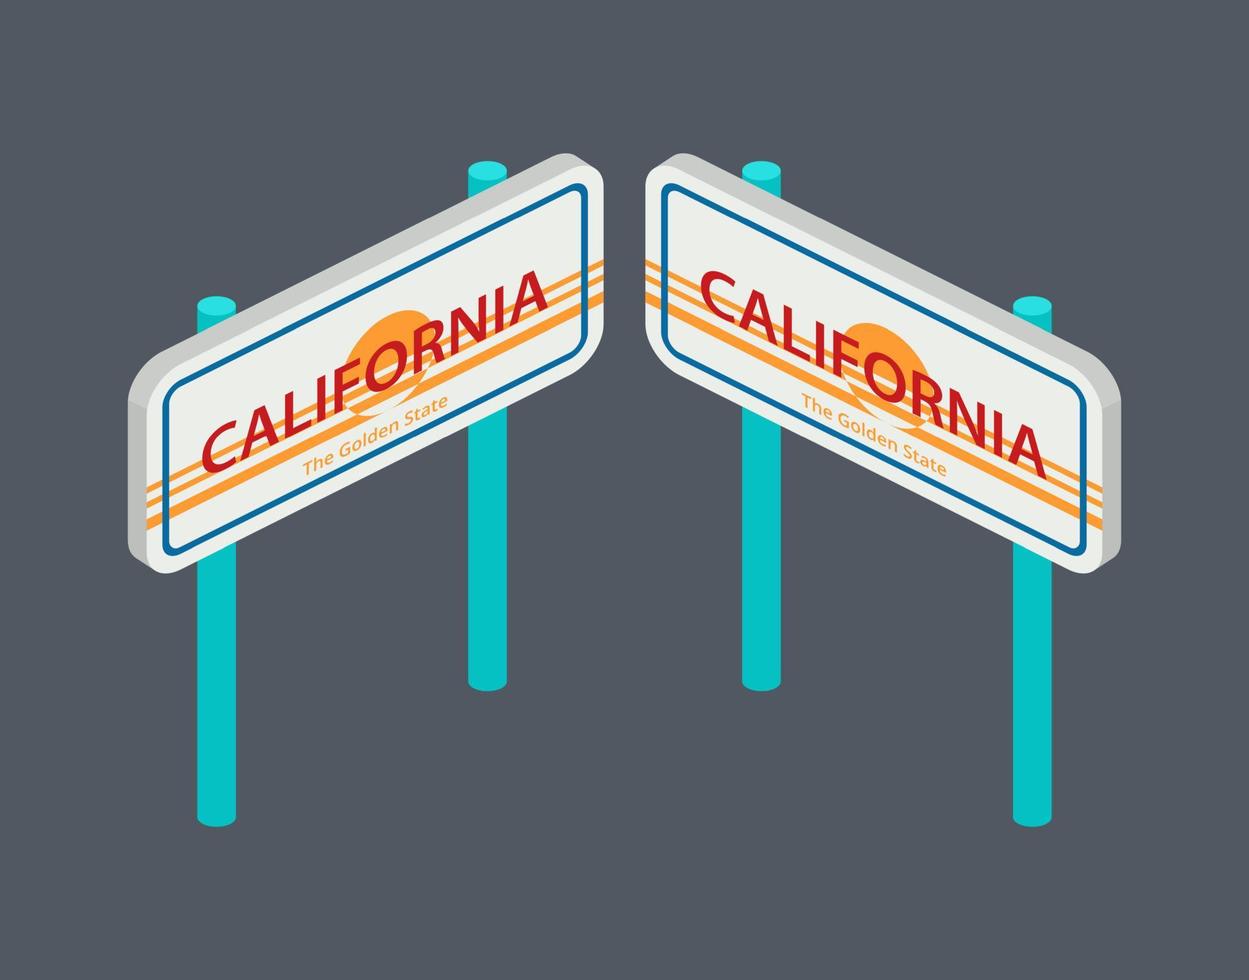 Isometric set of pillars with arrows indicating the direction of California for the map. Vector illustration.